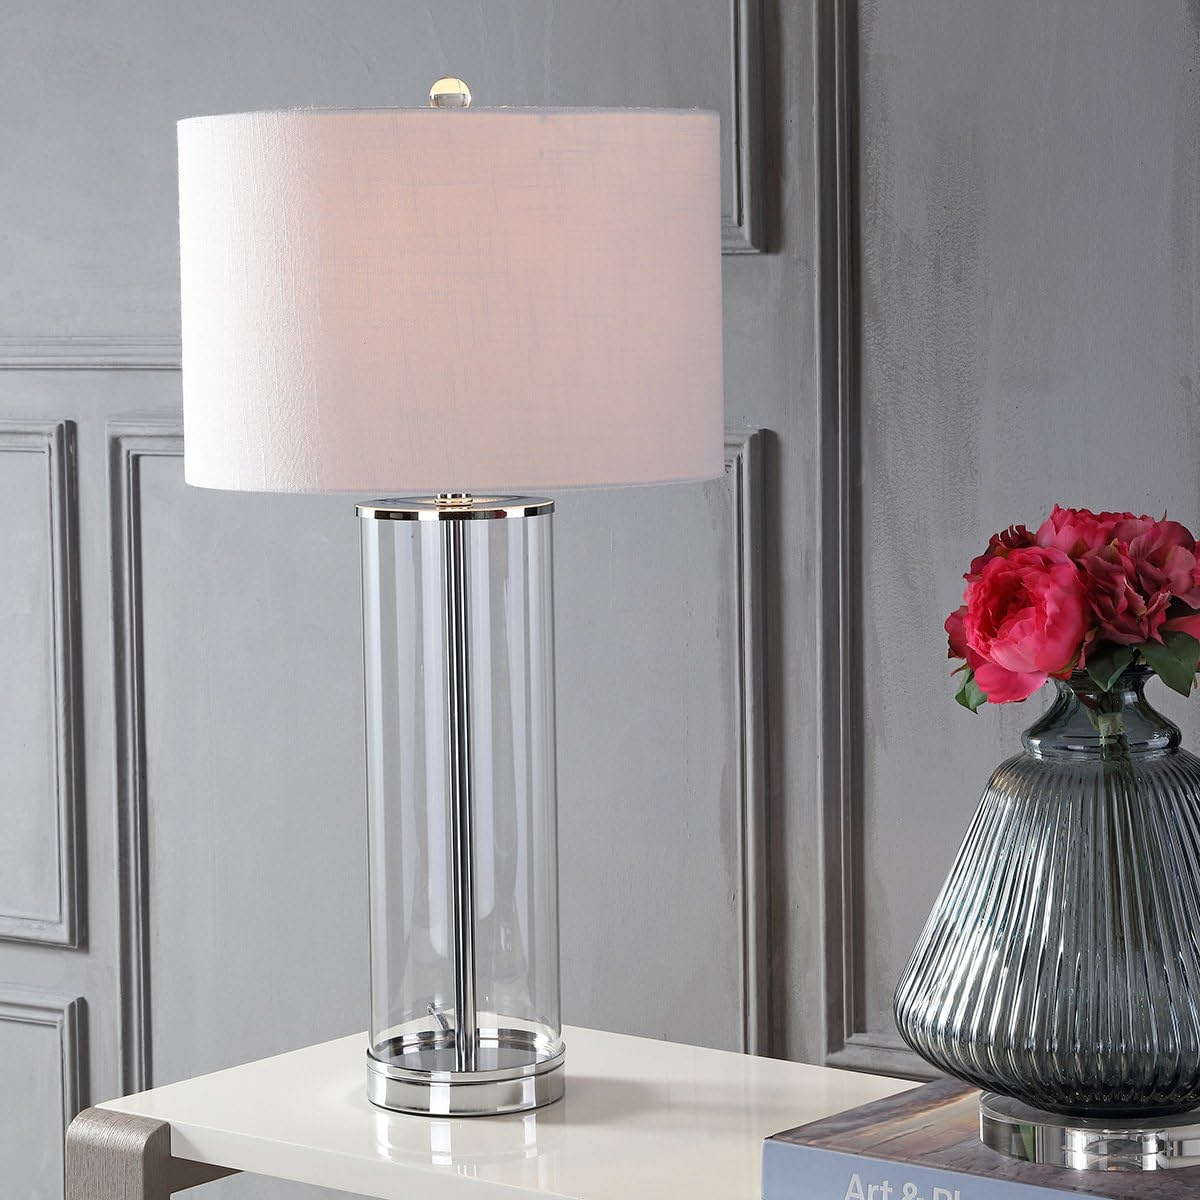 JONATHAN Y JYL2004A Harper 29" Modern Contemporary Glass LED Table Lamp